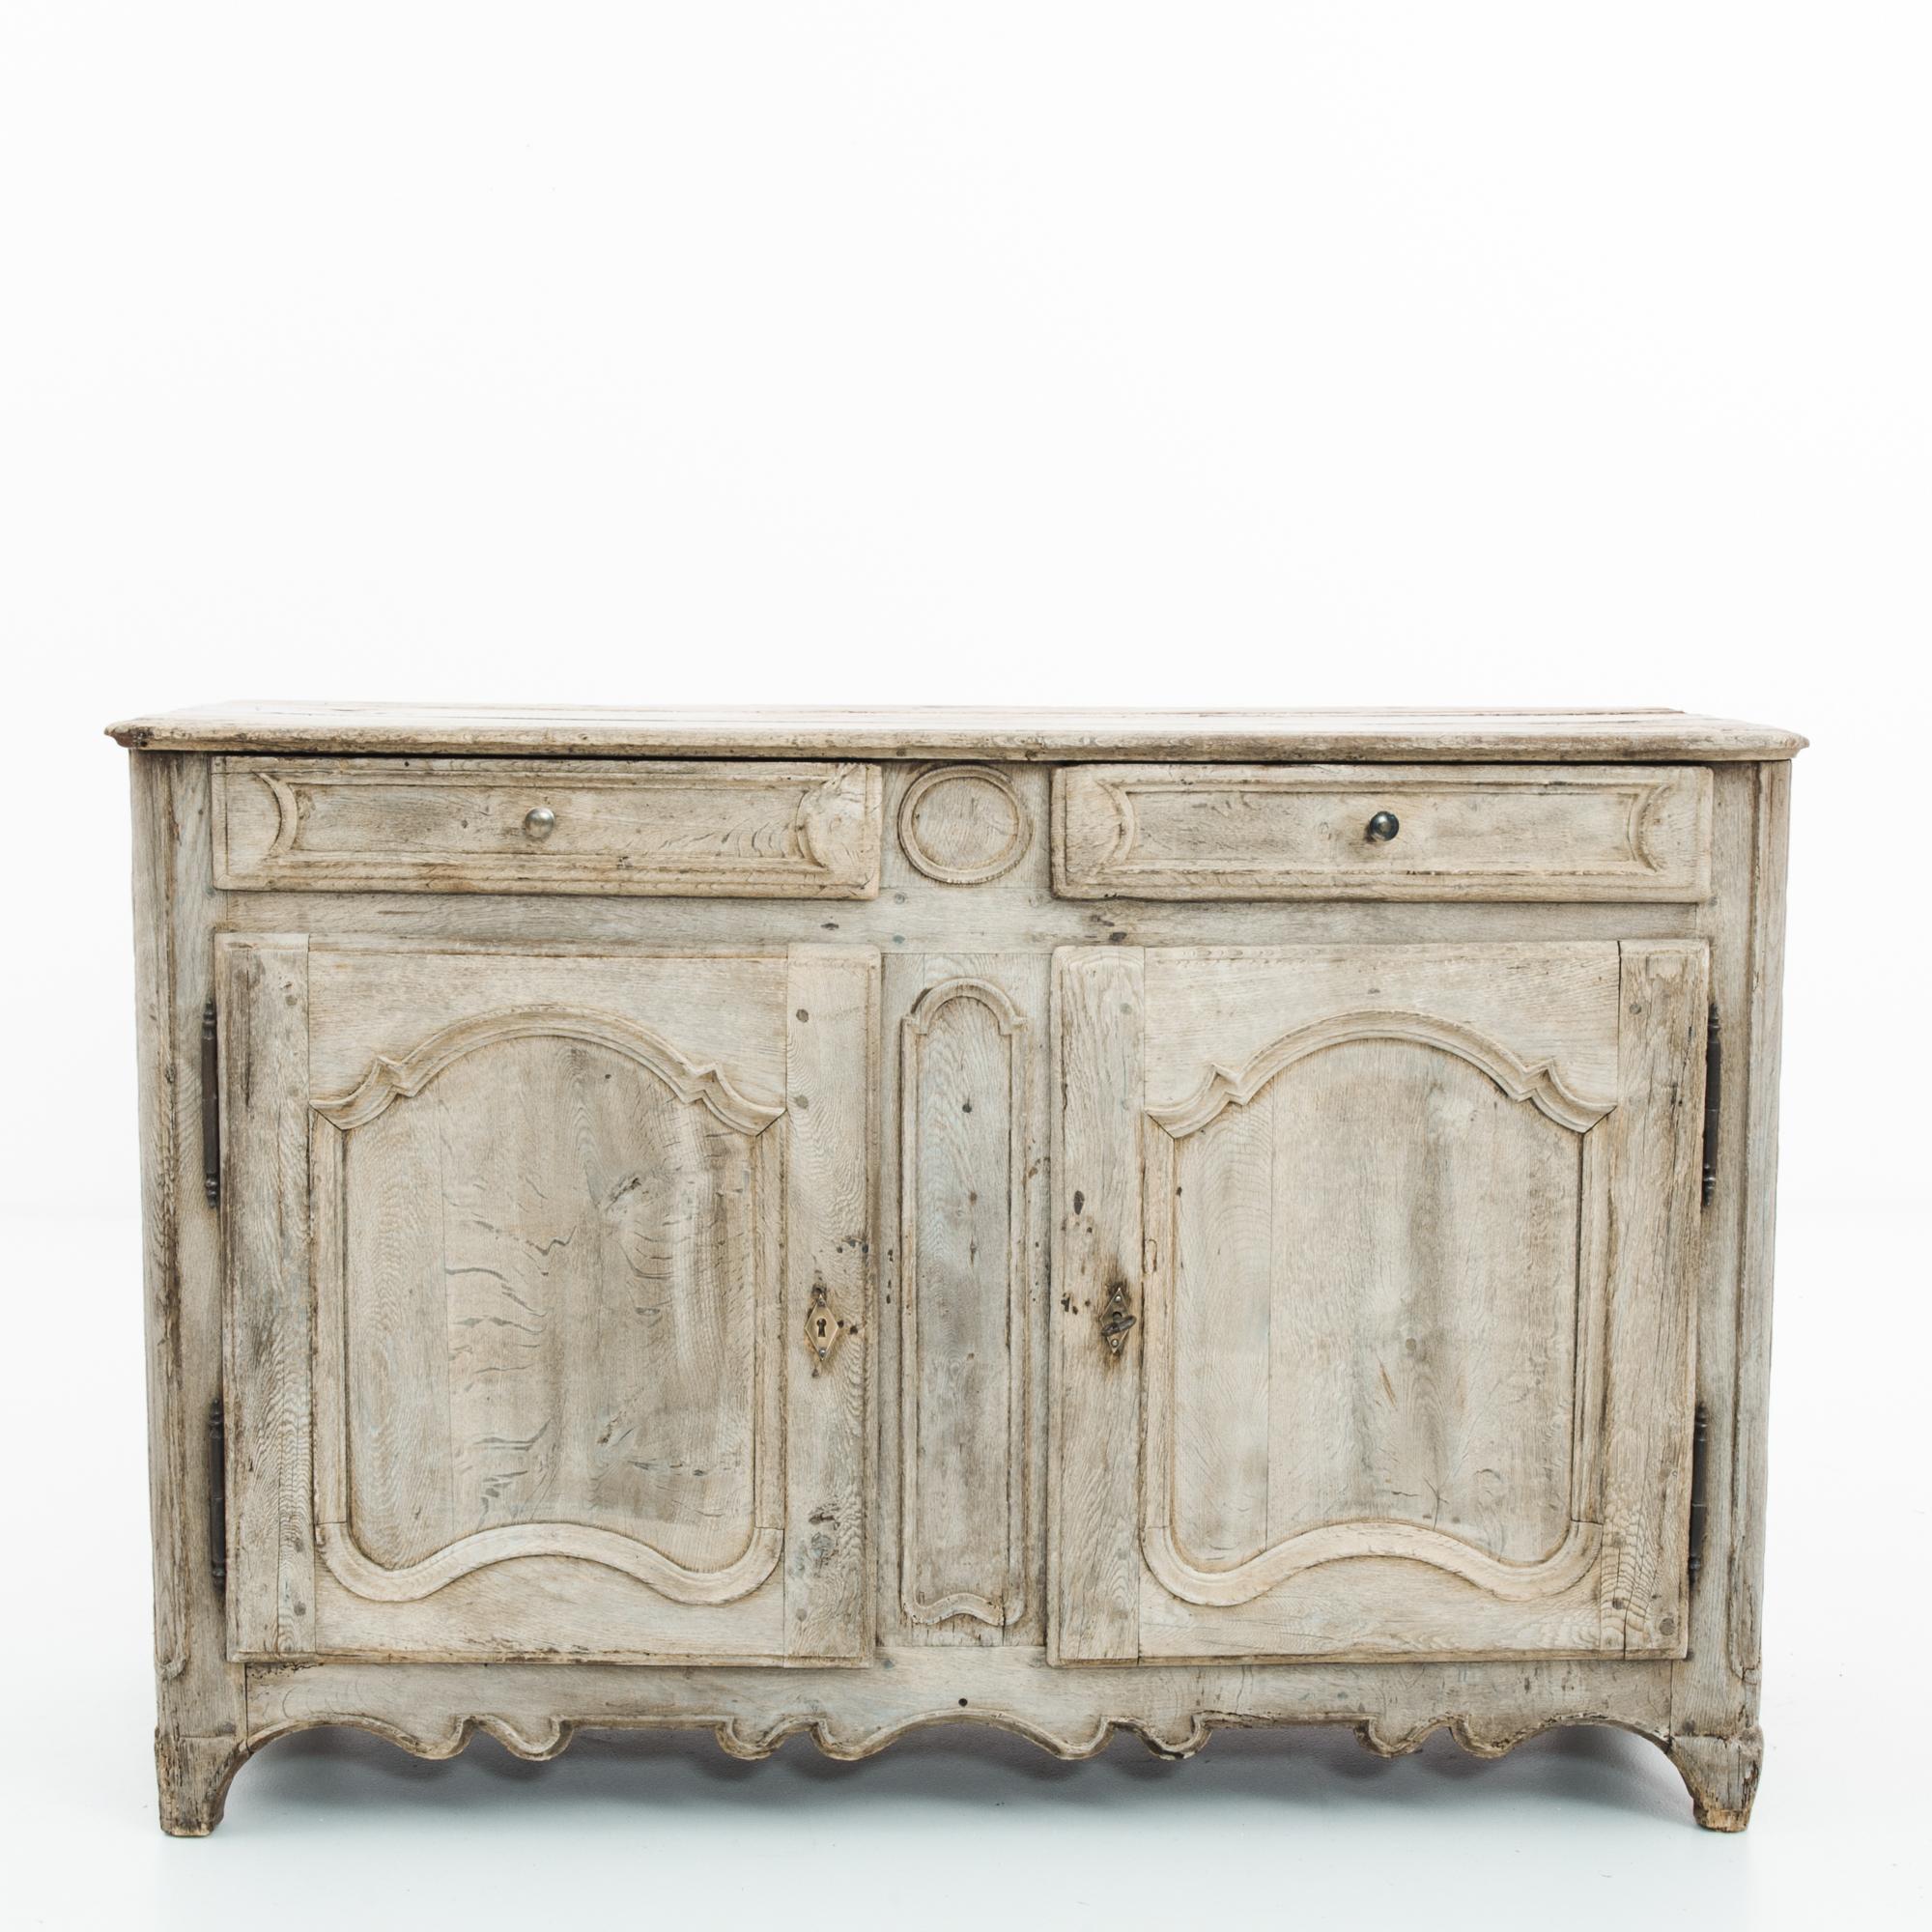 An oak buffet from France, circa 1820. The upright frame is enhanced with subtle rococo stylings: the embellished curve of the door panelling, the scalloped apron, the slight cabriole of the feet. The wood has been restored to a natural finish,